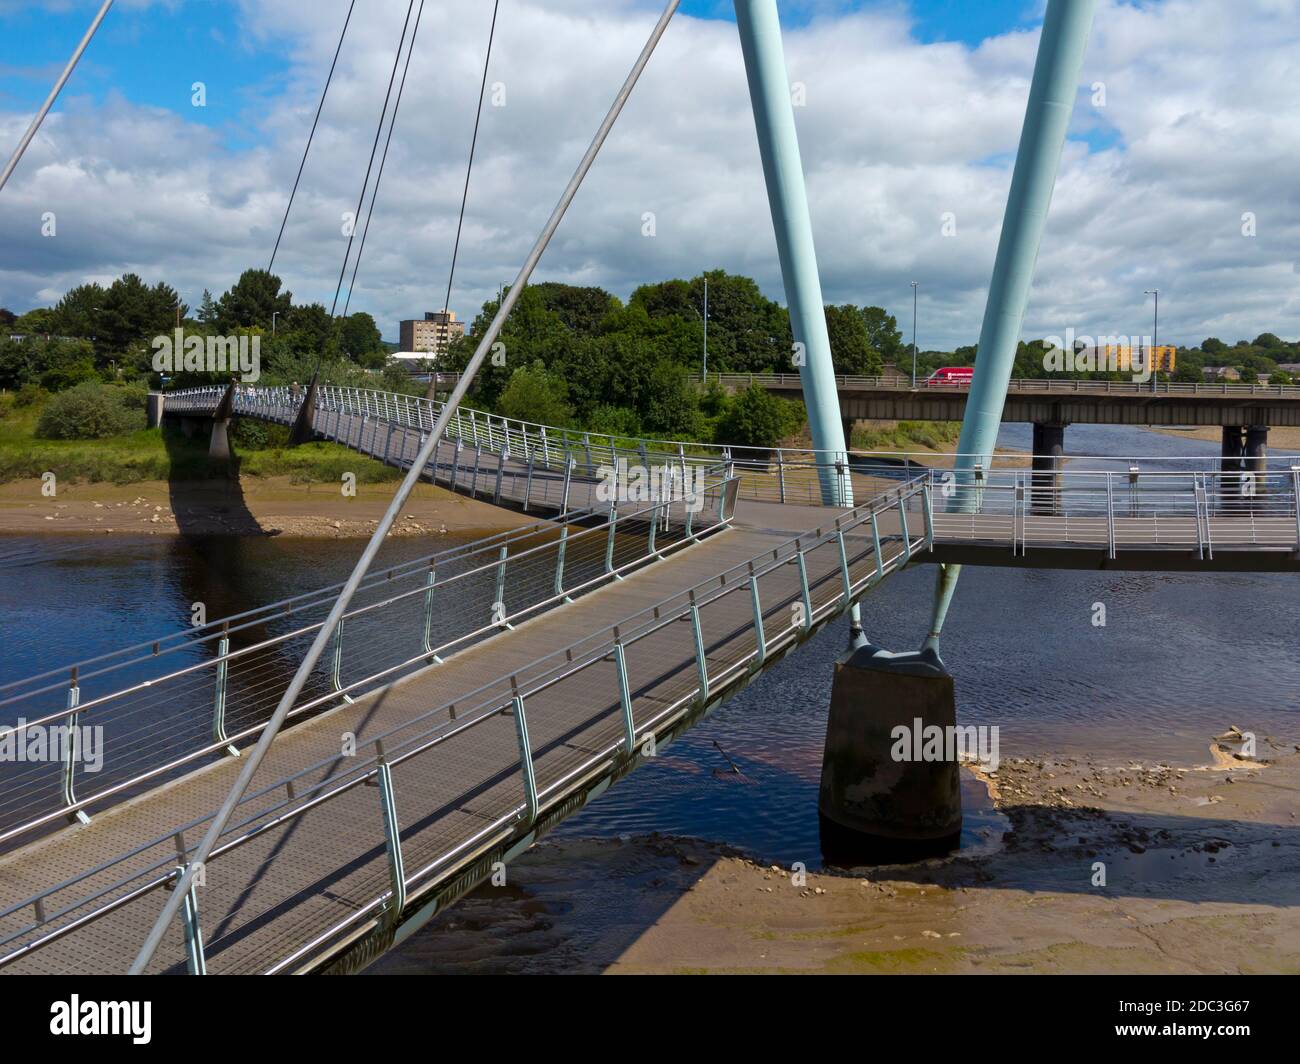 The Lune Millennium Bridge a cable-stayed footbridge which spans the River Lune in Lancaster England designed by Whitby Bird and Partners in 2000. Stock Photo